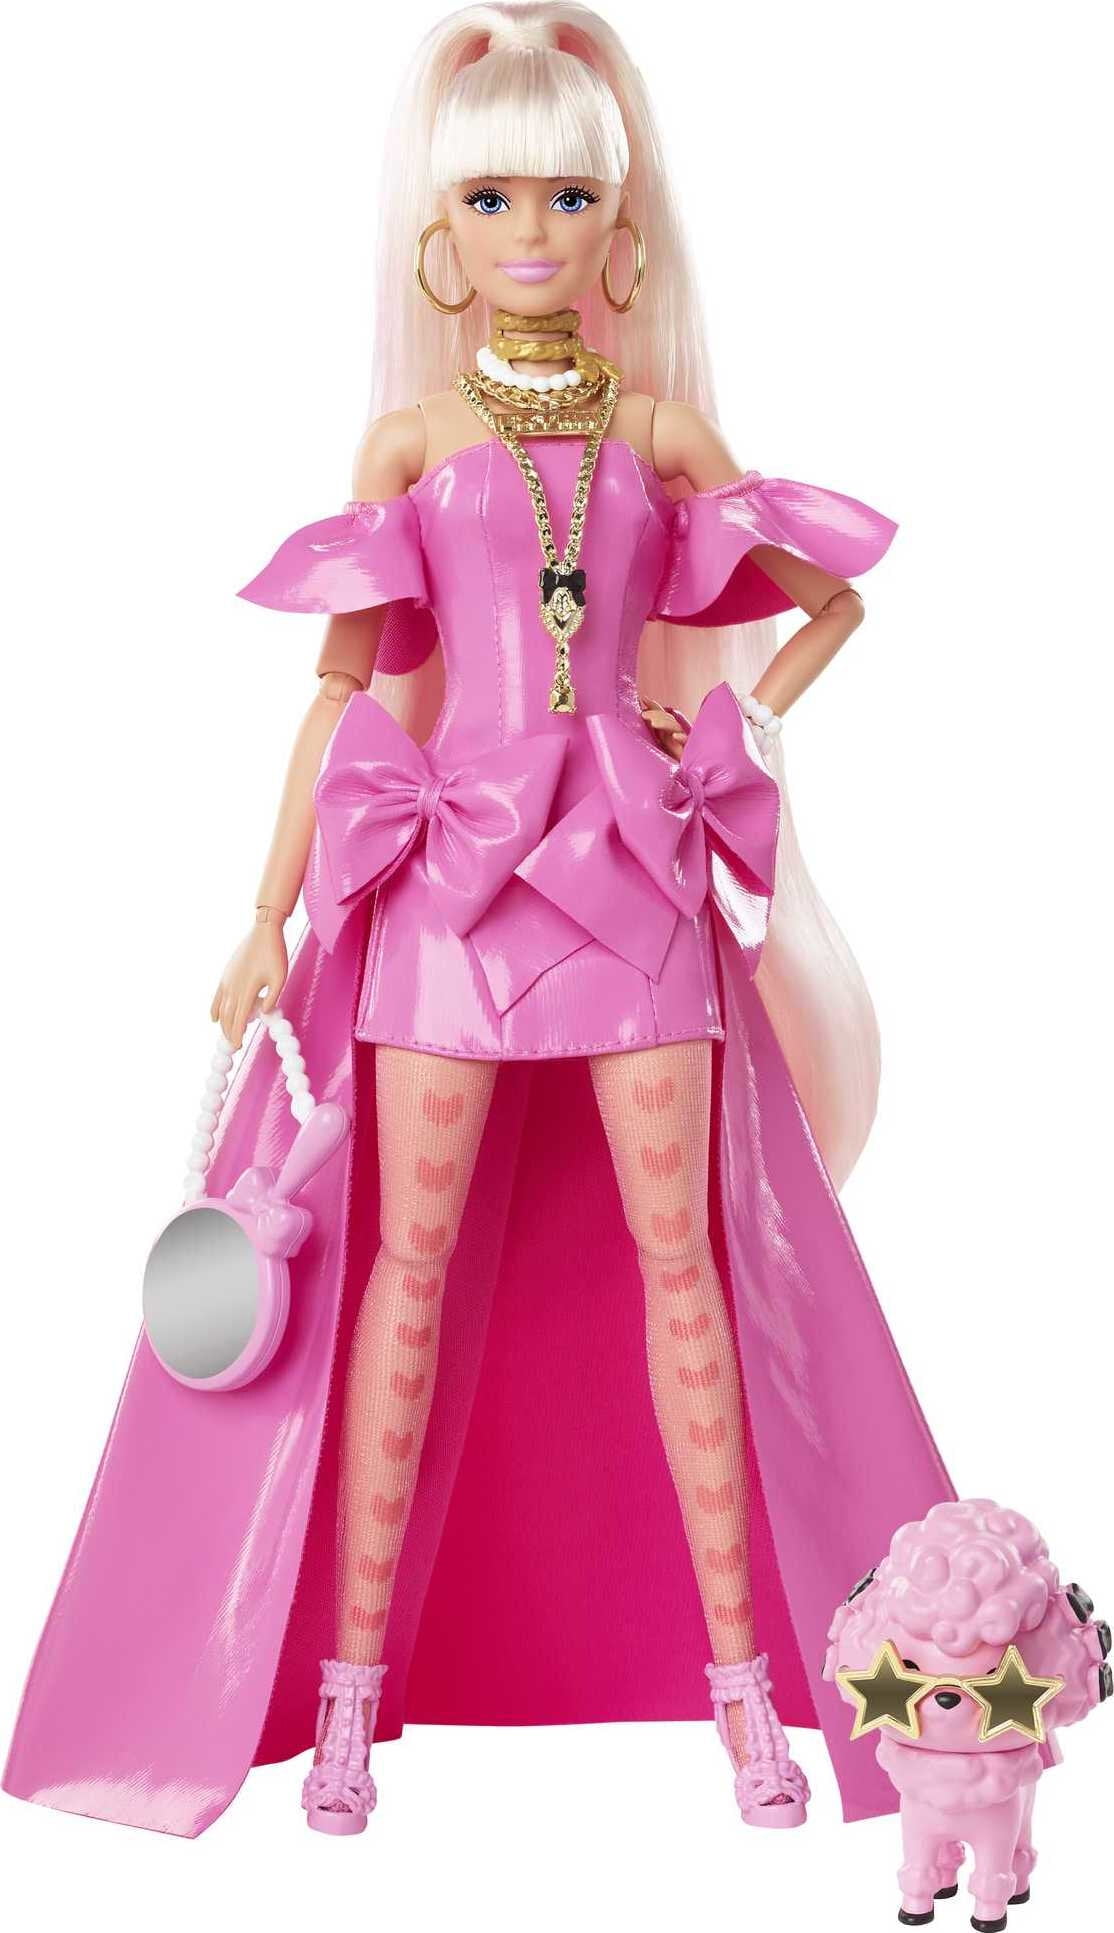 Barbie Extra Fancy Doll With Extra Long Blond Hair Blue Eyes In Pink Glossy Gown With Accessories E4ee3b61 5cb4 458f 9c14 975746a45696.630d06346940c82be326559f63a69697 